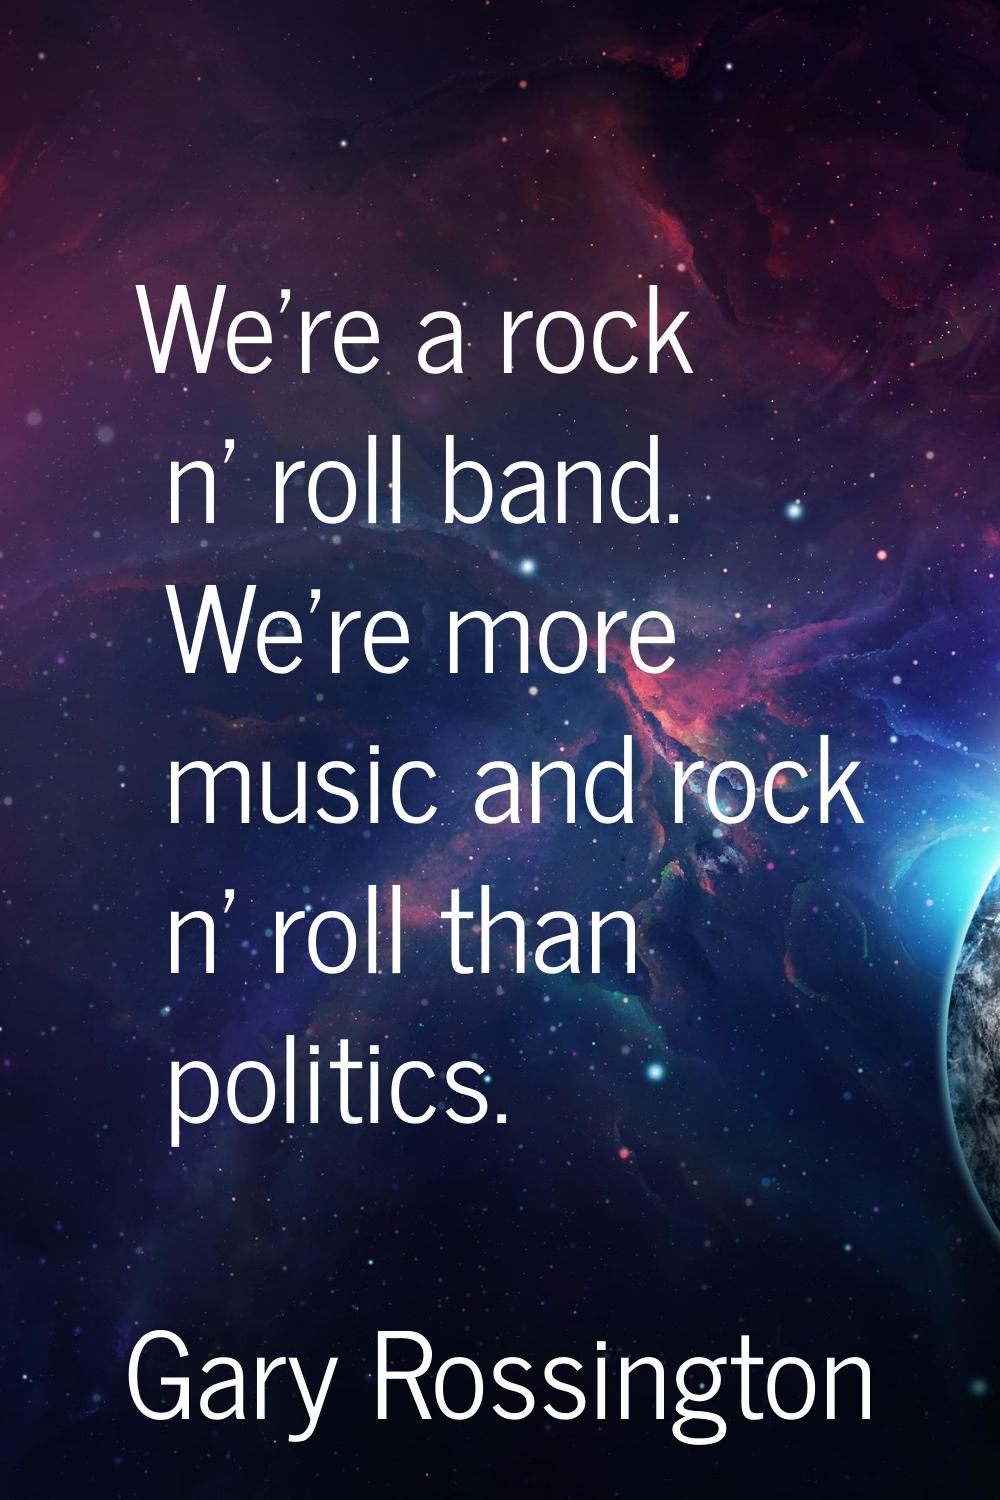 We're a rock n' roll band. We're more music and rock n' roll than politics.